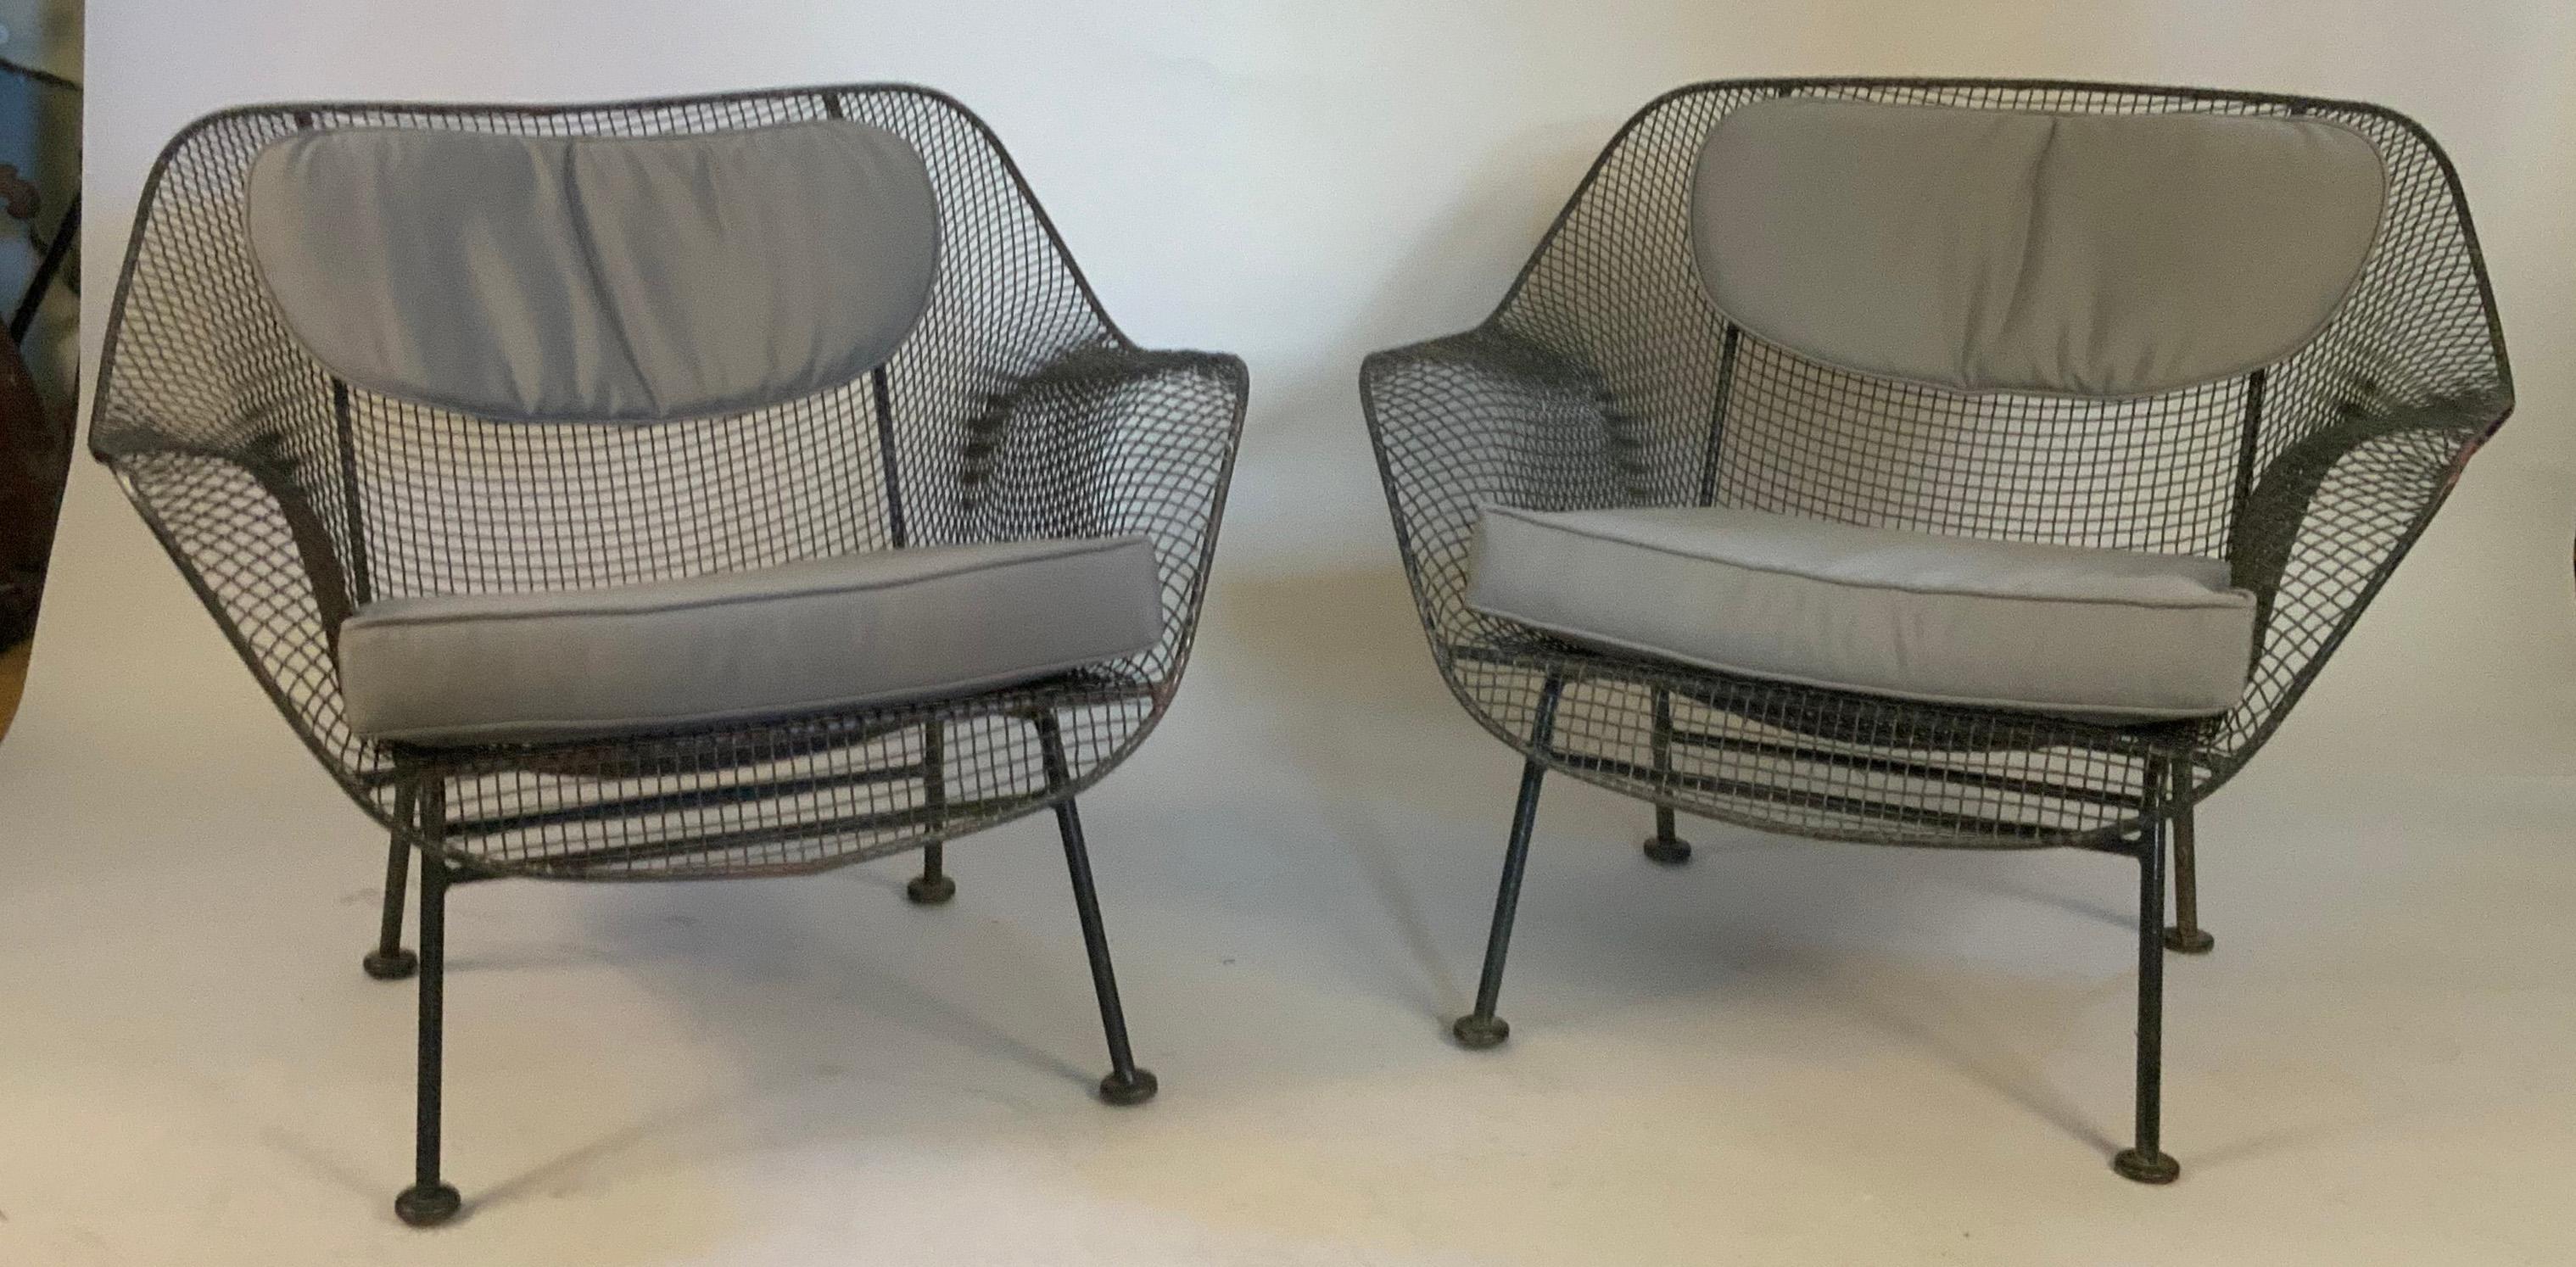 American Pair of 1950's Sculptura Wrought Iron Lounge Chairs by Russell Woodard